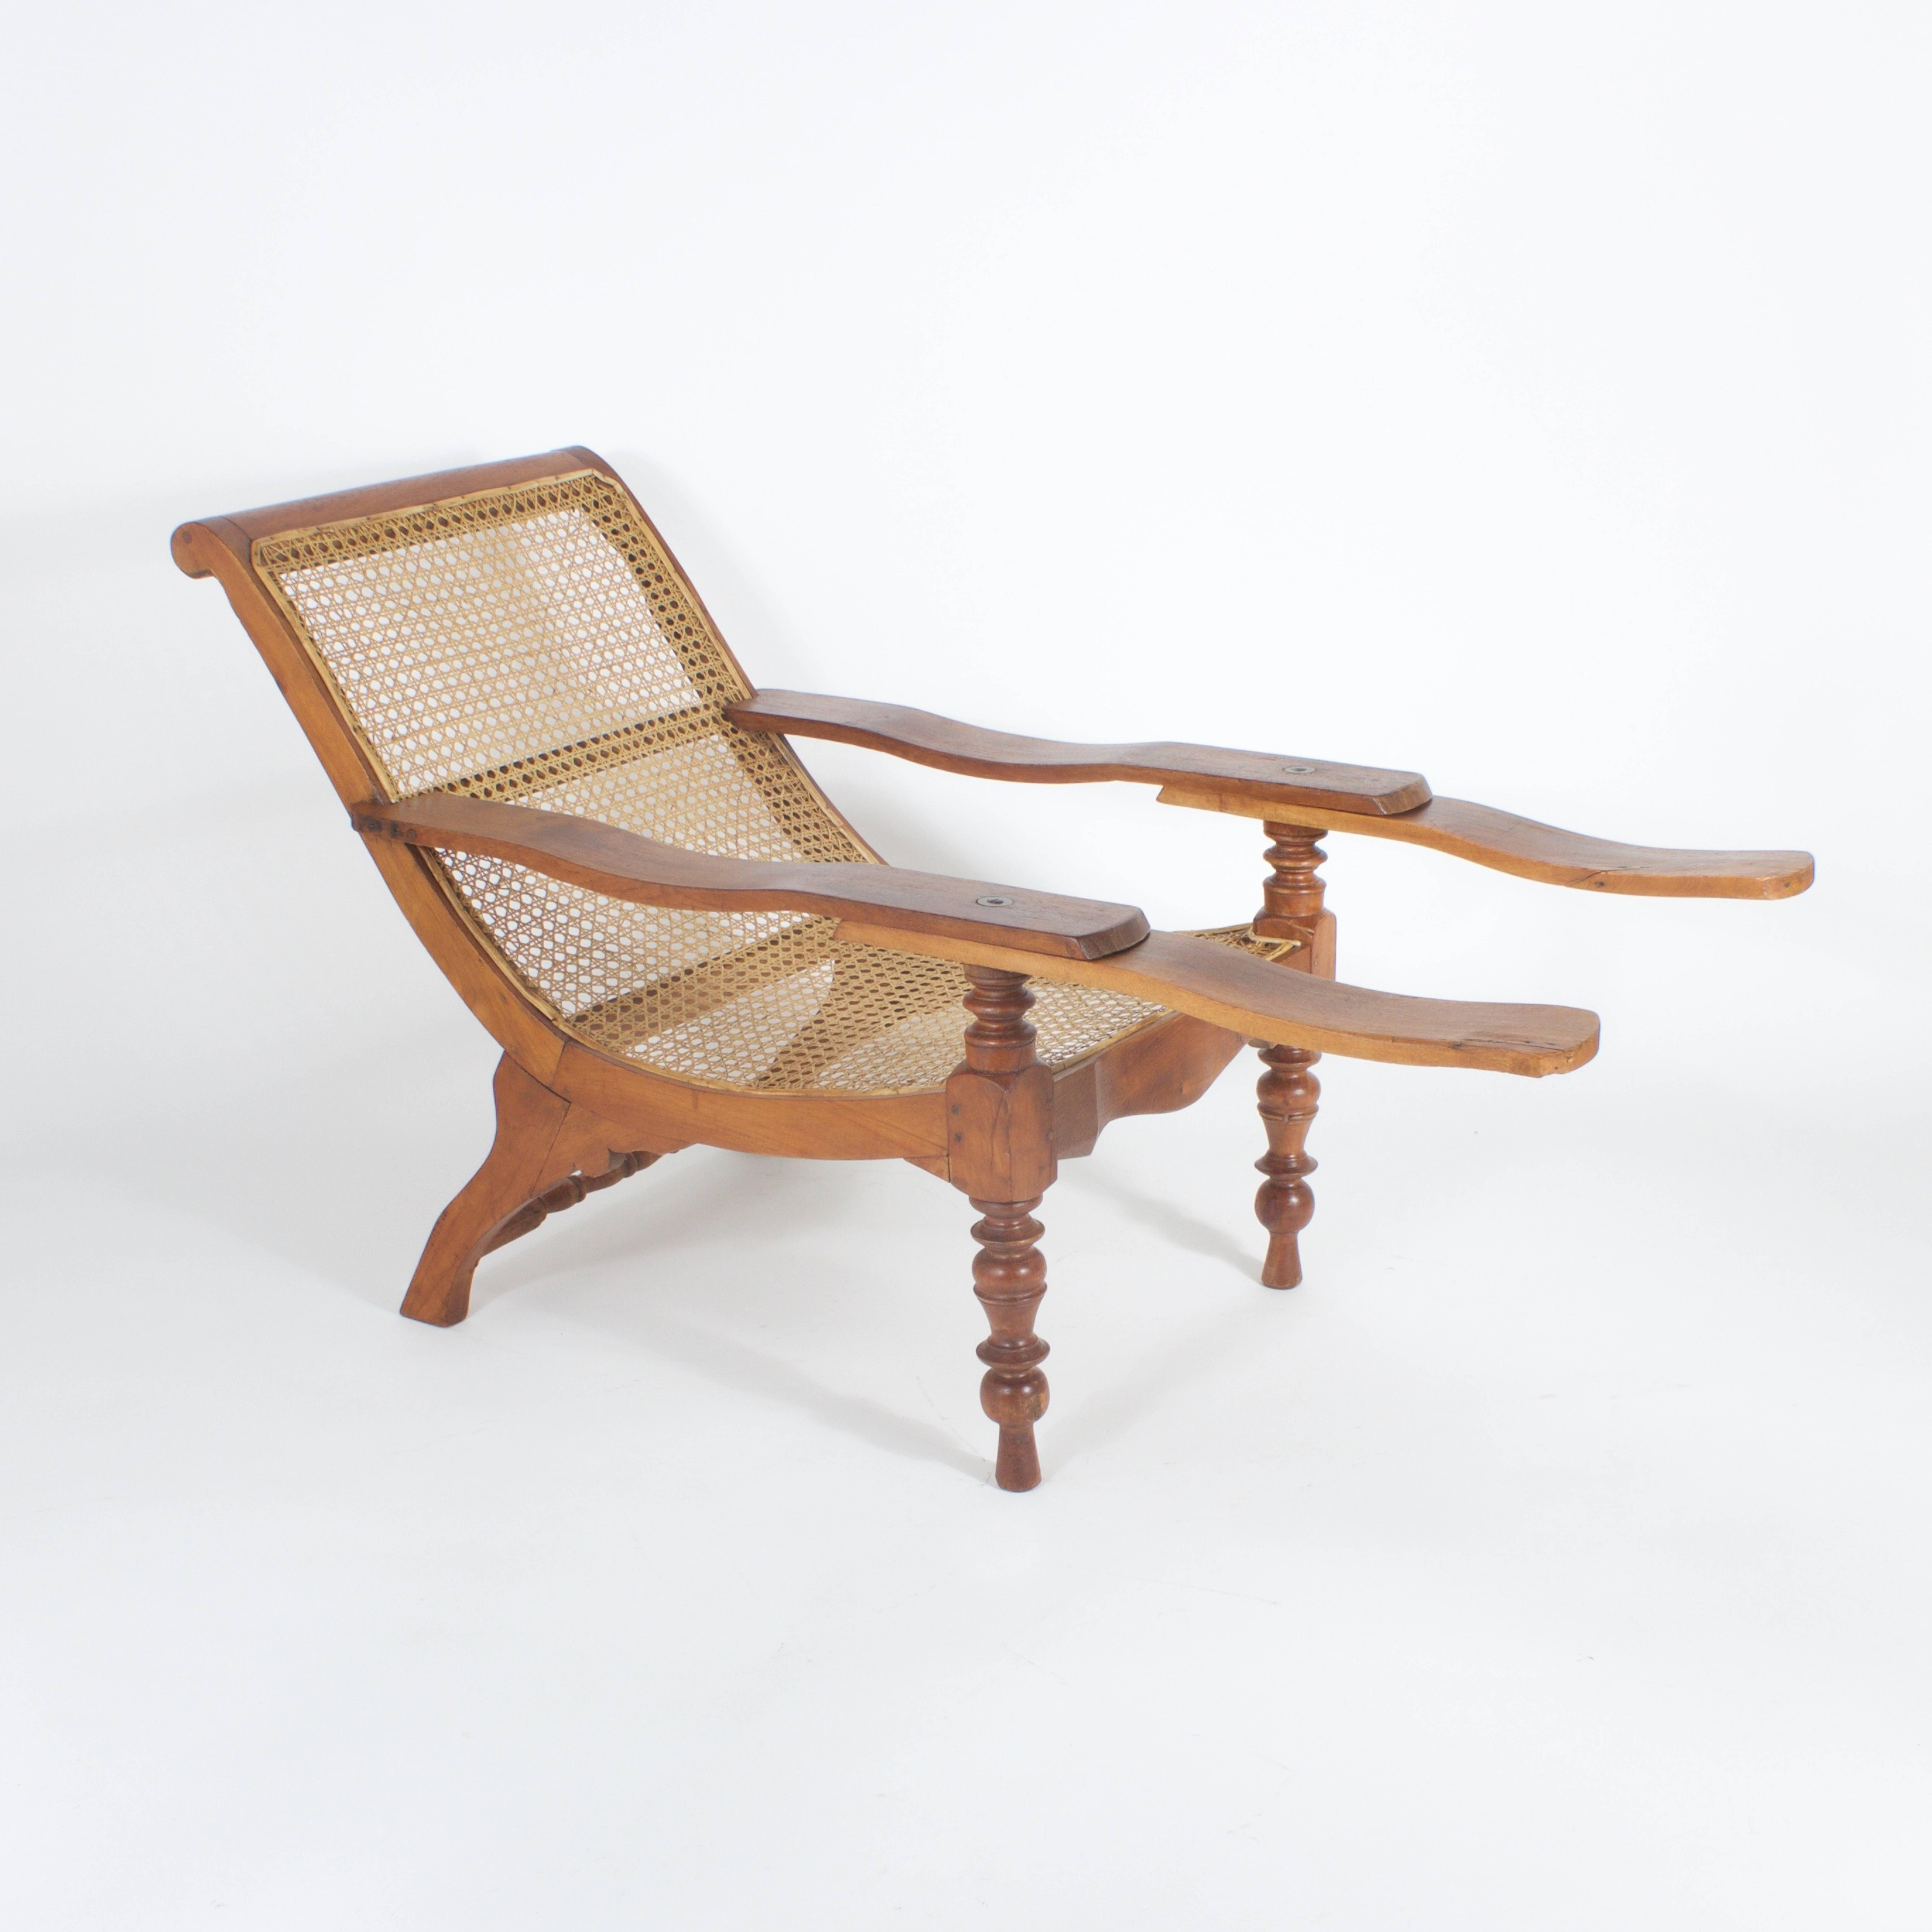 Antique mahogany planters or plantation chair with caned seat and back. Having well chosen wood grains, scalloped front skirt and rare bowed with arms and arm extensions. Uncommon Indian style turned front legs and back leg stretcher. Overall with a